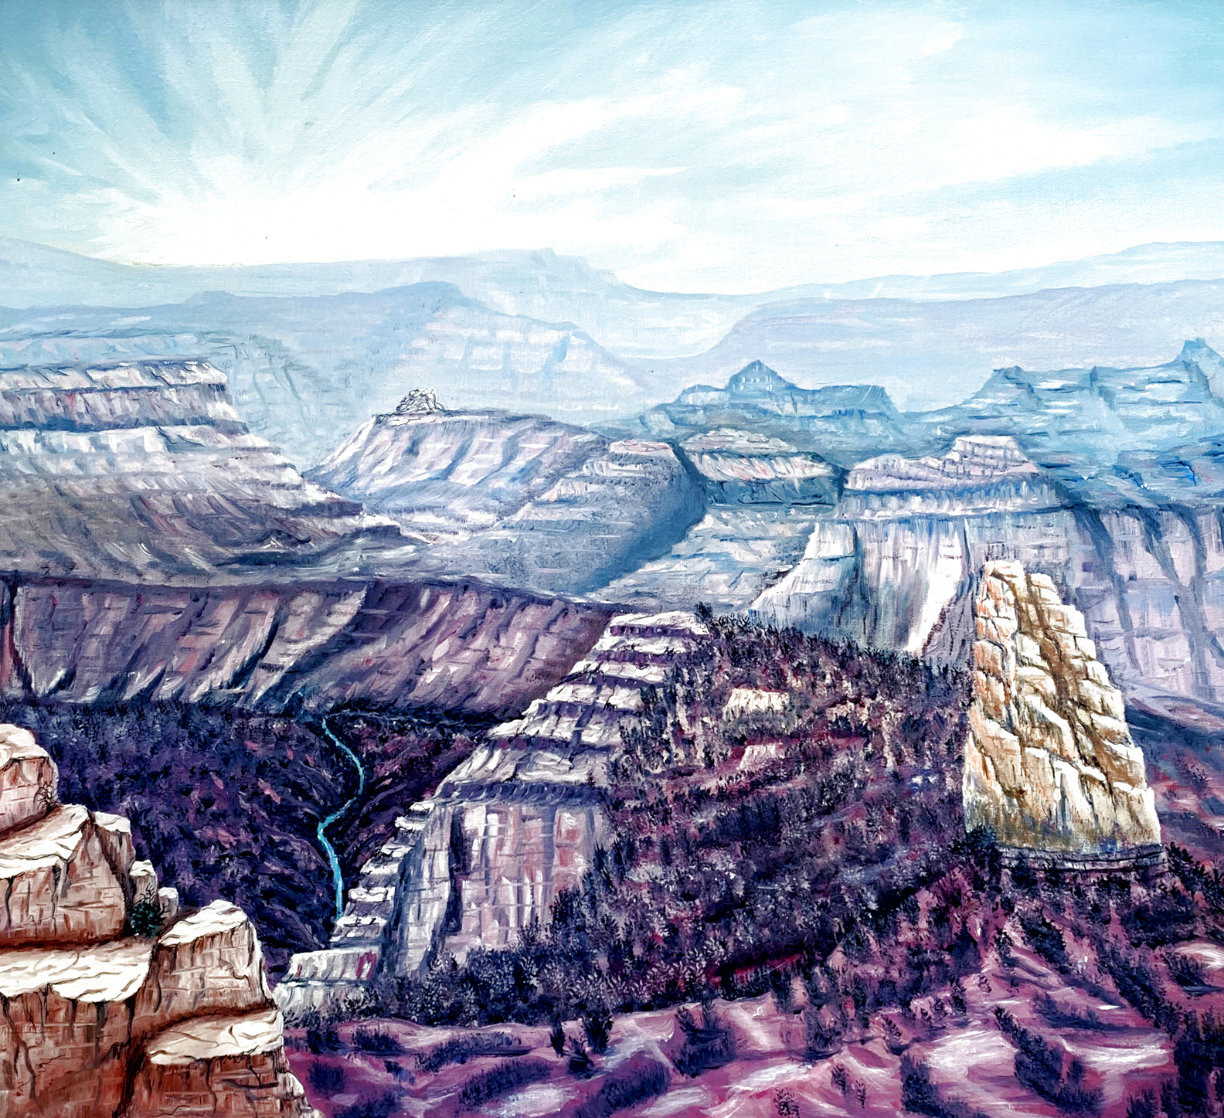 Mount Hayden From the Point Imperial North Rim of the Grand Canyon 1986 25x31 Arizona Original Painting by Armin Widmer